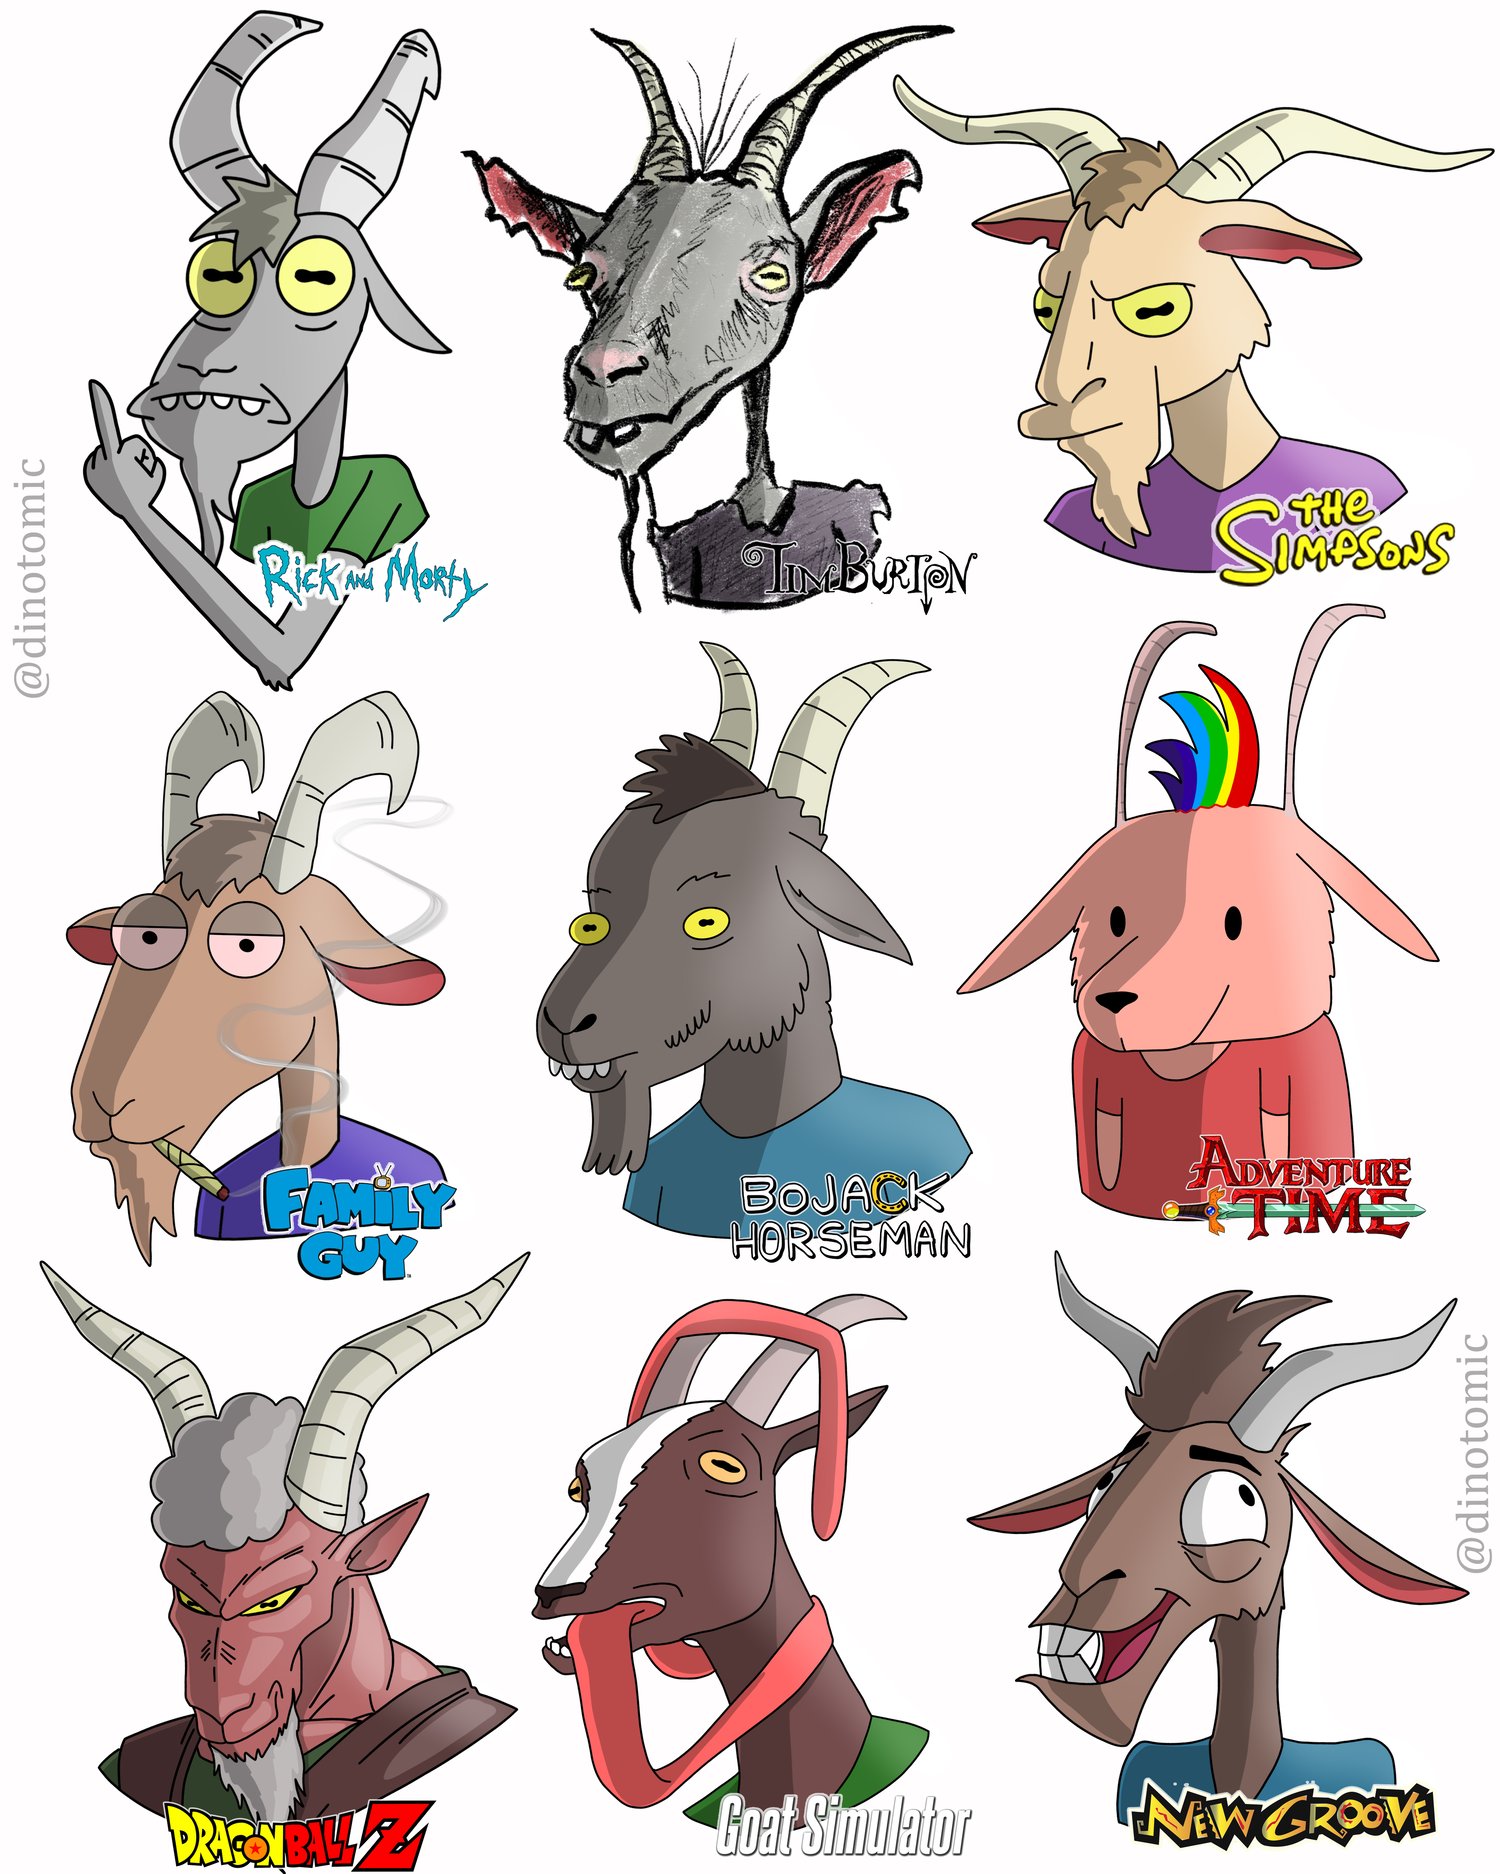 Image of #230 Goat drawn in 9 styles